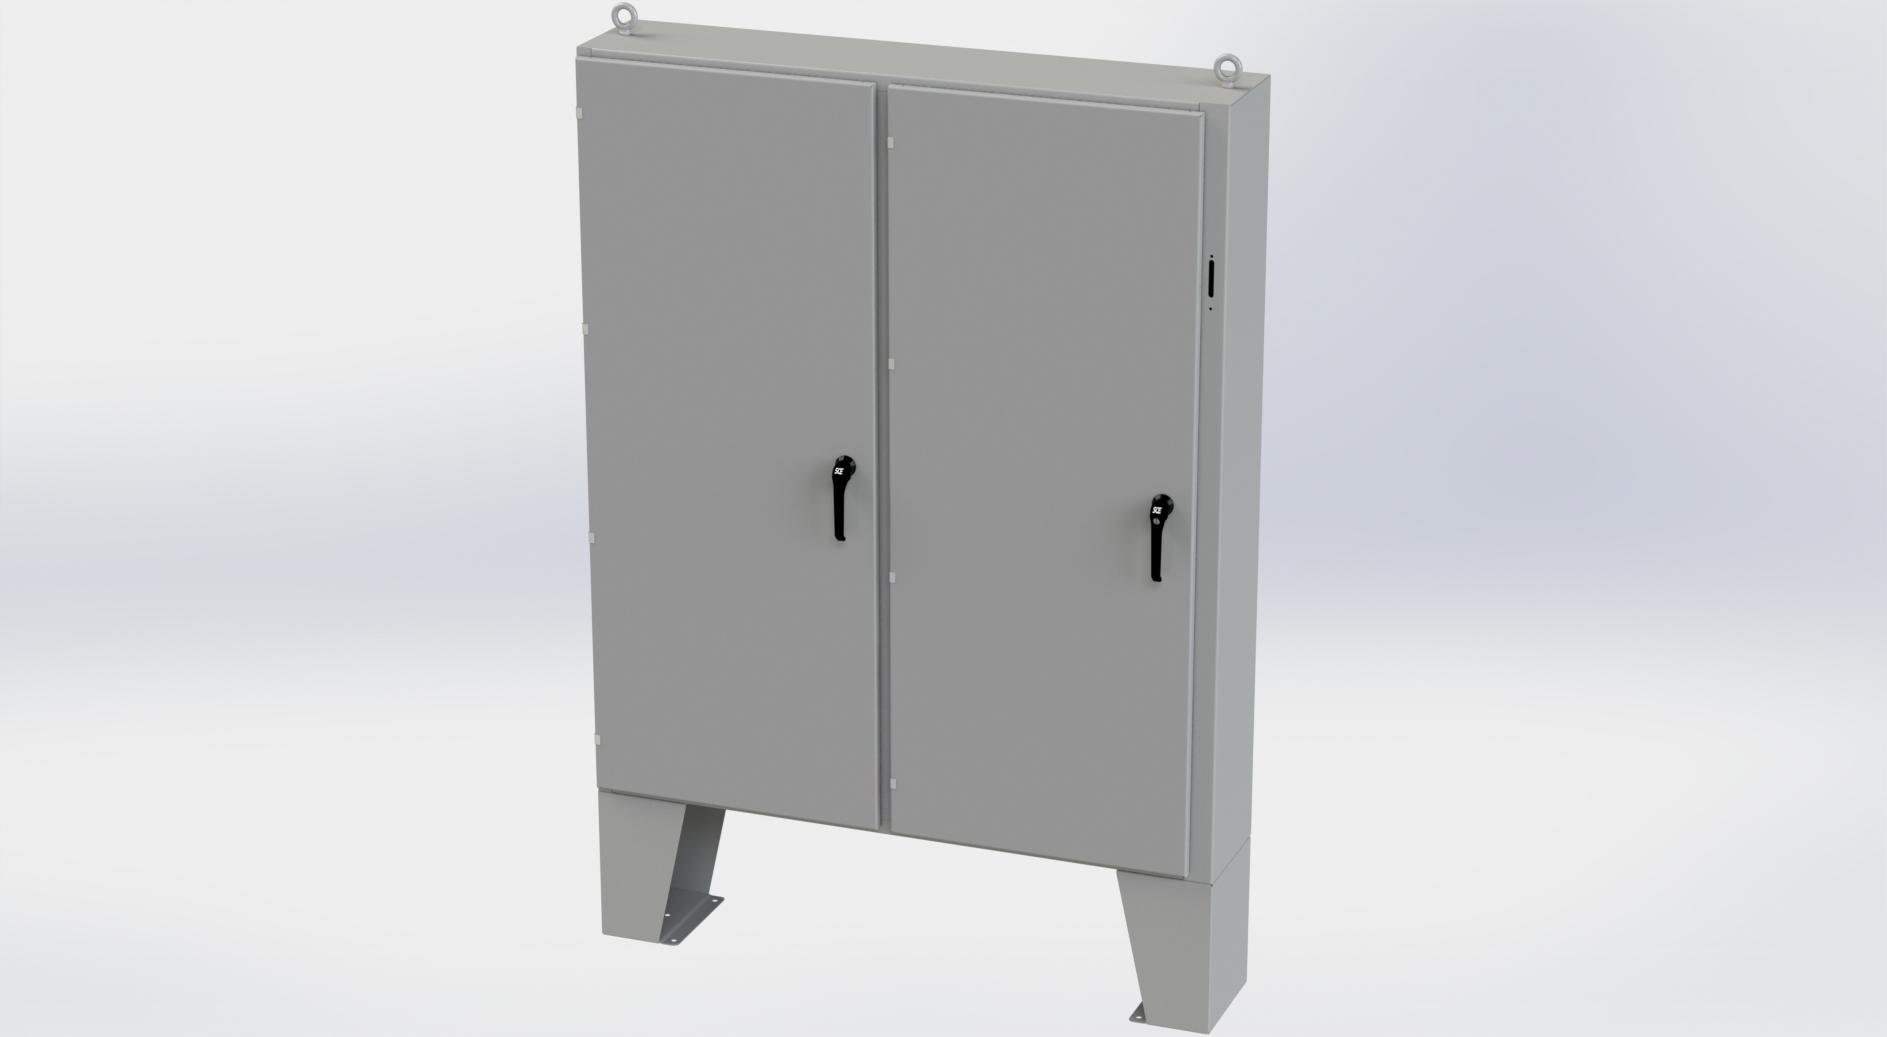 Saginaw Control SCE-72XEL6112LP 2DR XEL Enclosure, Height:72.00", Width:61.00", Depth:12.00", ANSI-61 gray powder coating inside and out. Optional sub-panels are powder coated white.